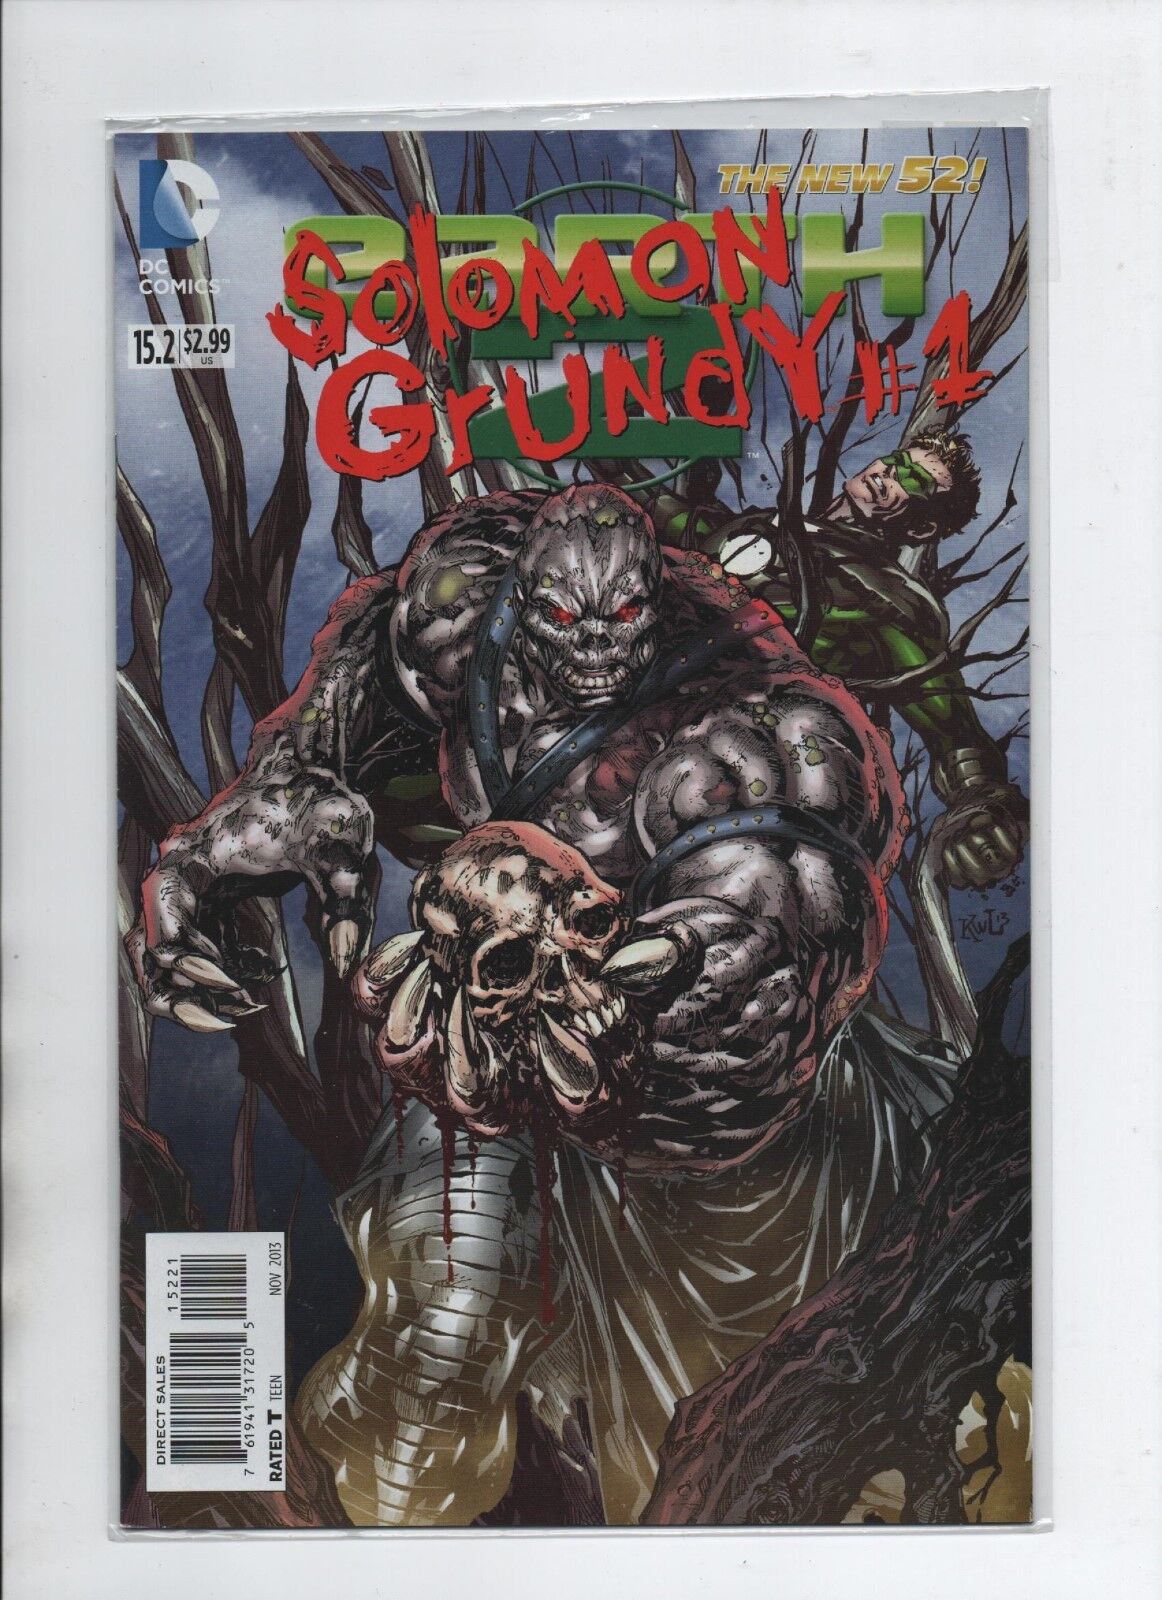 Earth 2 - Solomon Grundy #1 - The New 52 - DC Comics - Rated T. 